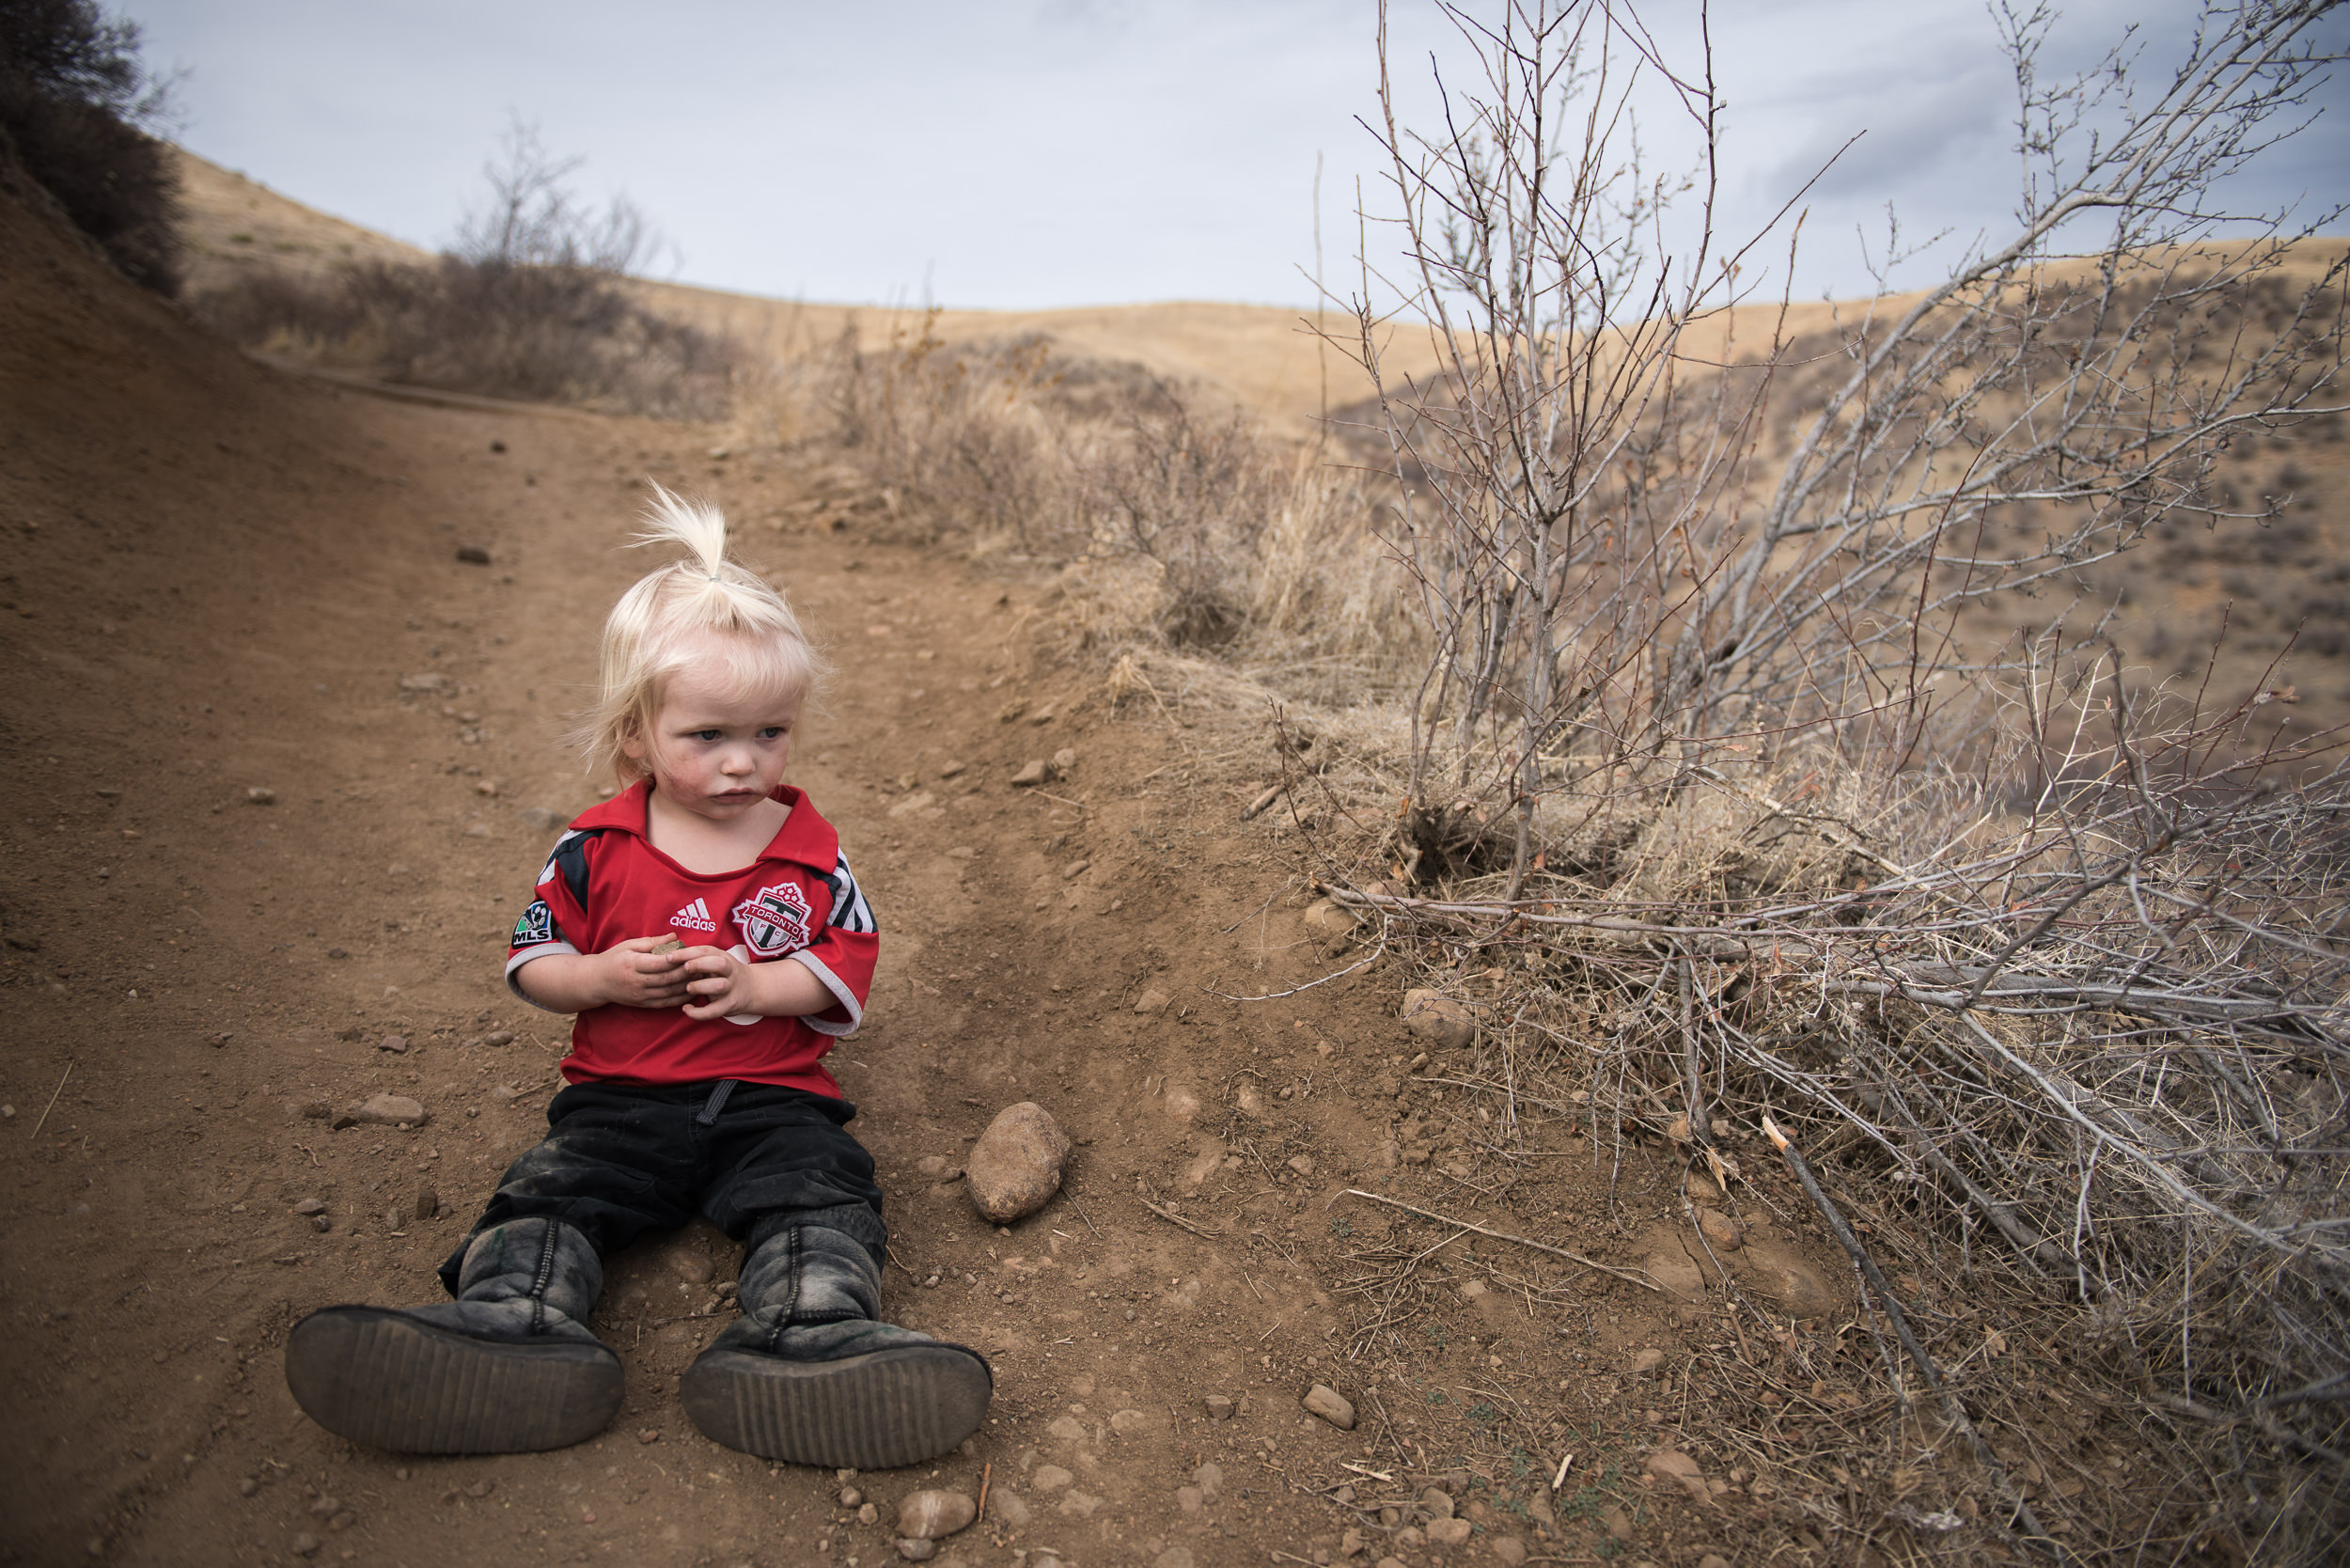 Blog - Molly Rees Photo - Documentary Childhood Photography - Boy on Green Mountain hiking trail in Denver Colorado by M. Menschel